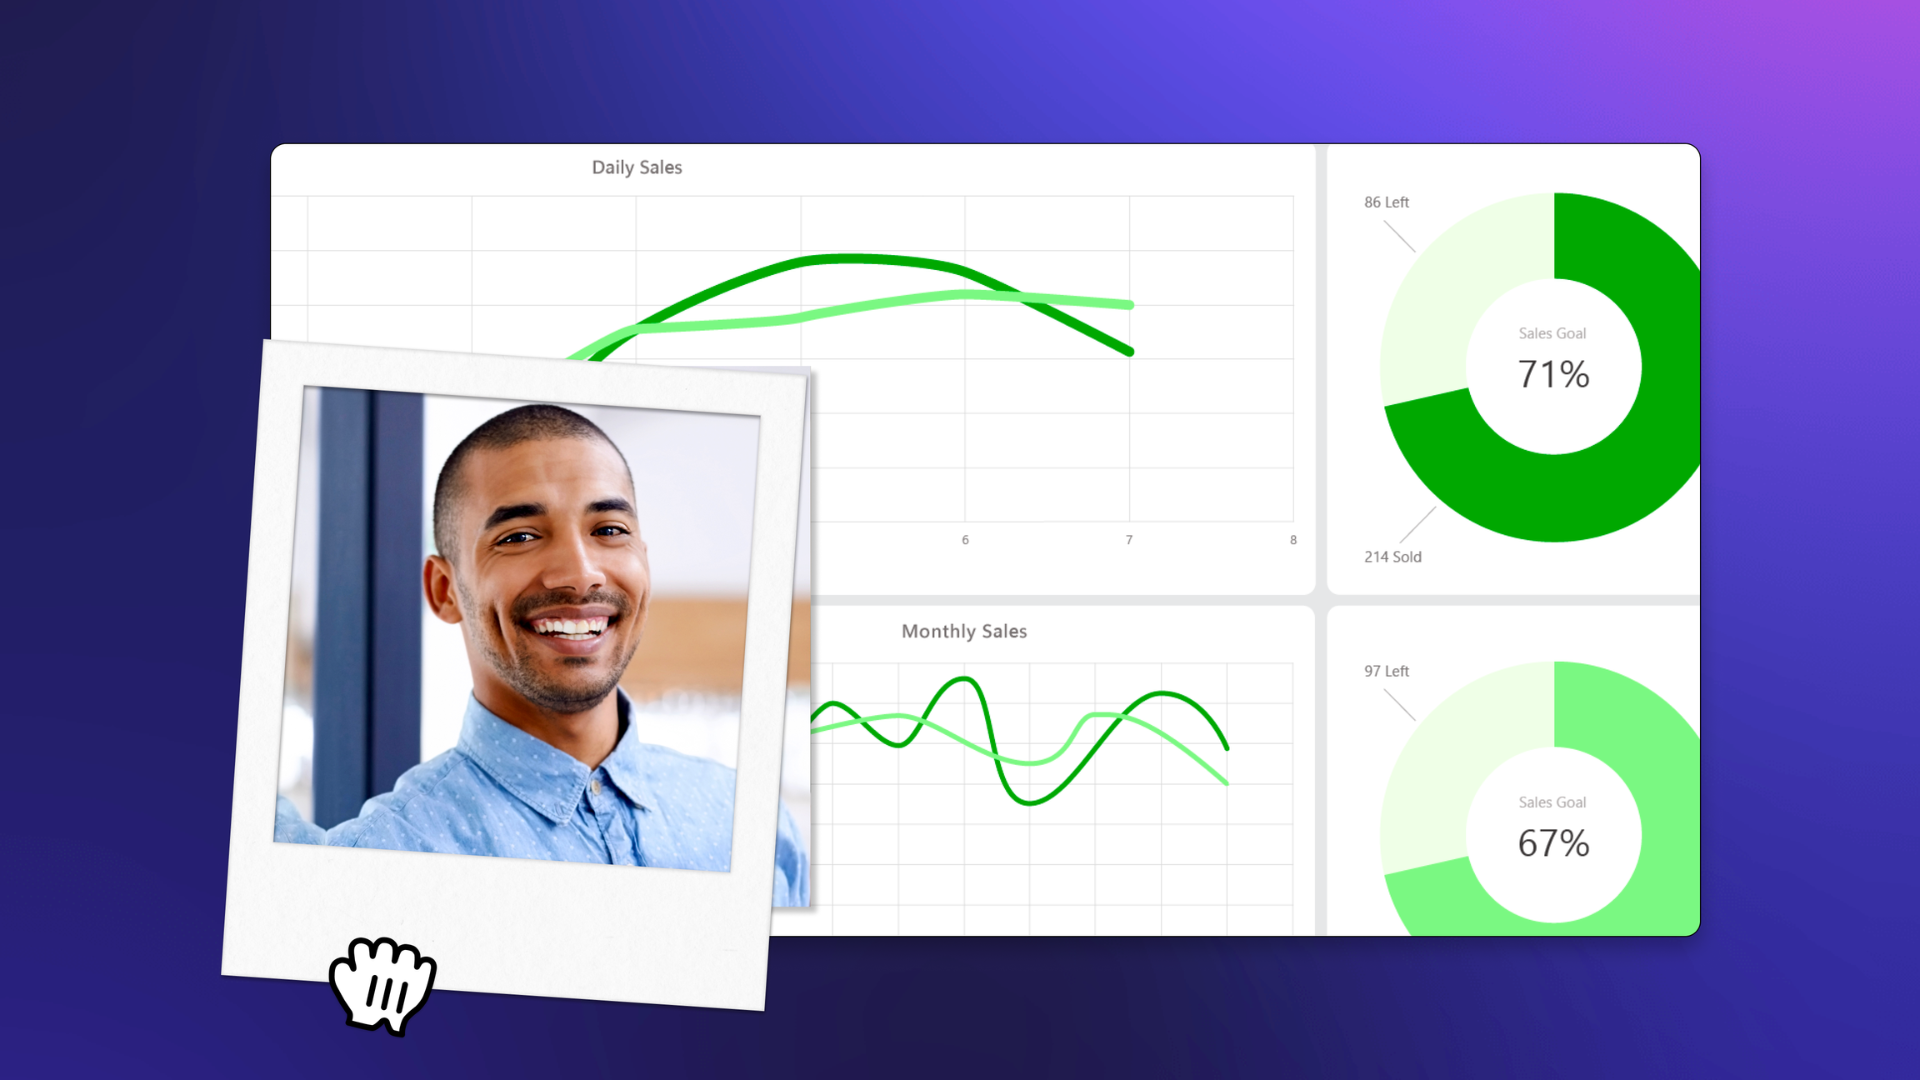 An image of a presentation or graph background overlayed with an image of a tutor. An overlay frame is also added on top of the tutor. 